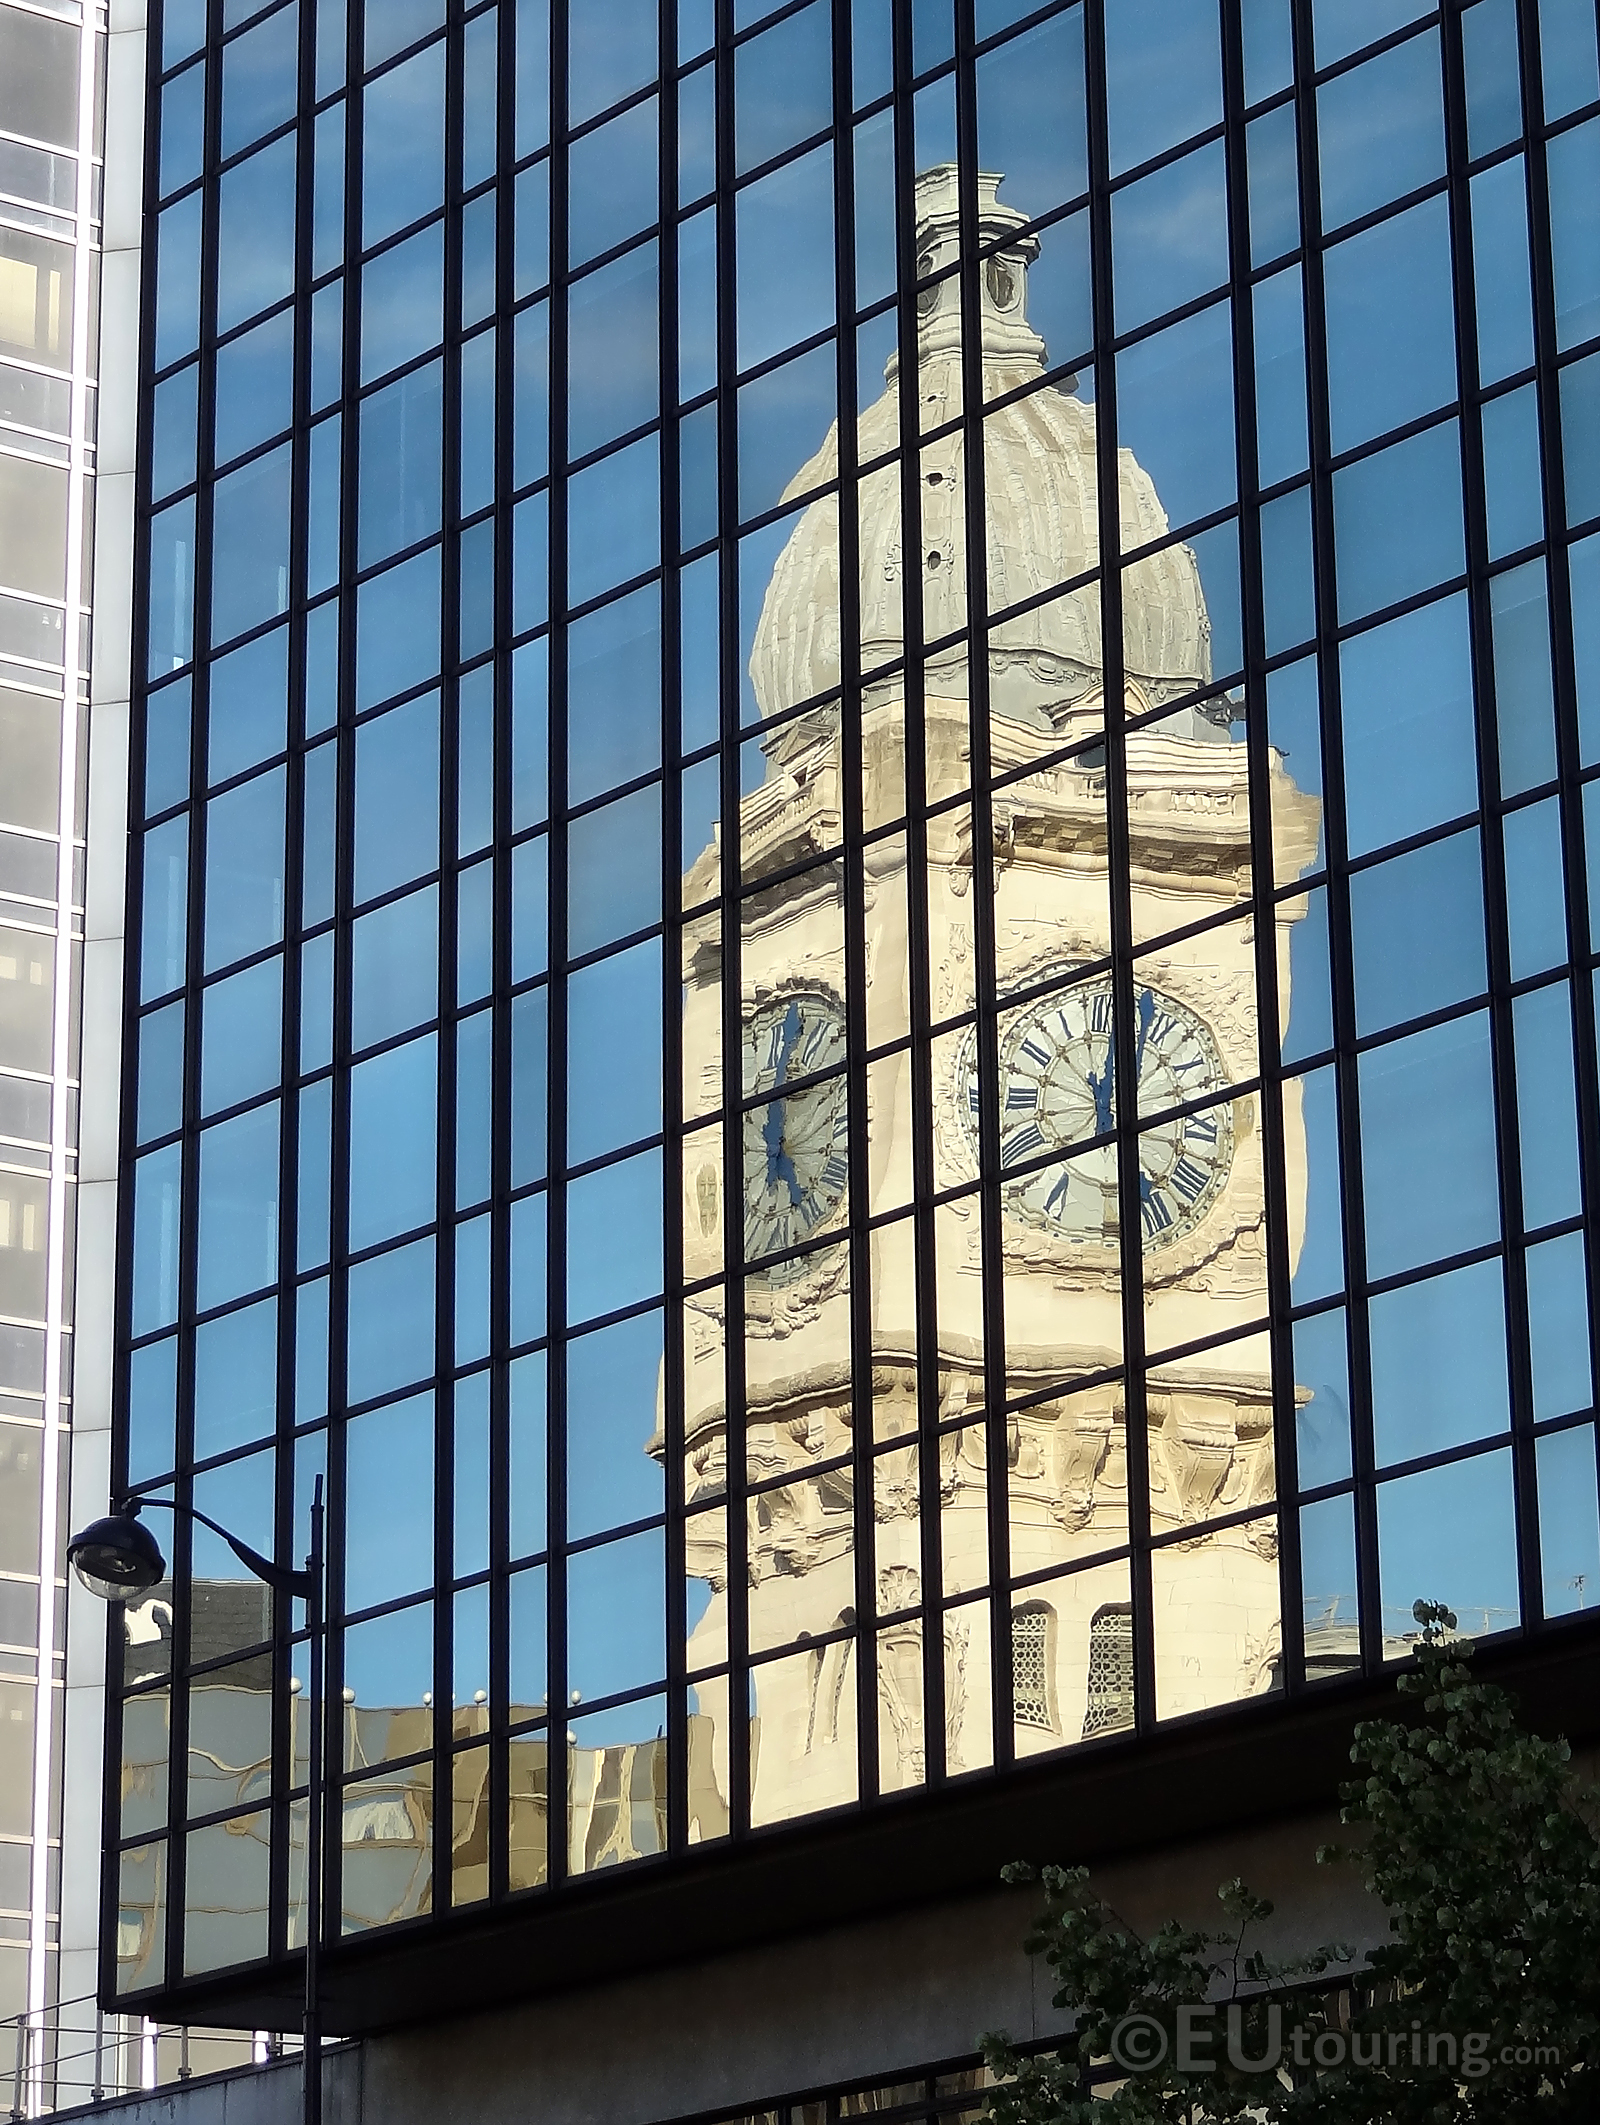 Reflection of the clock tower